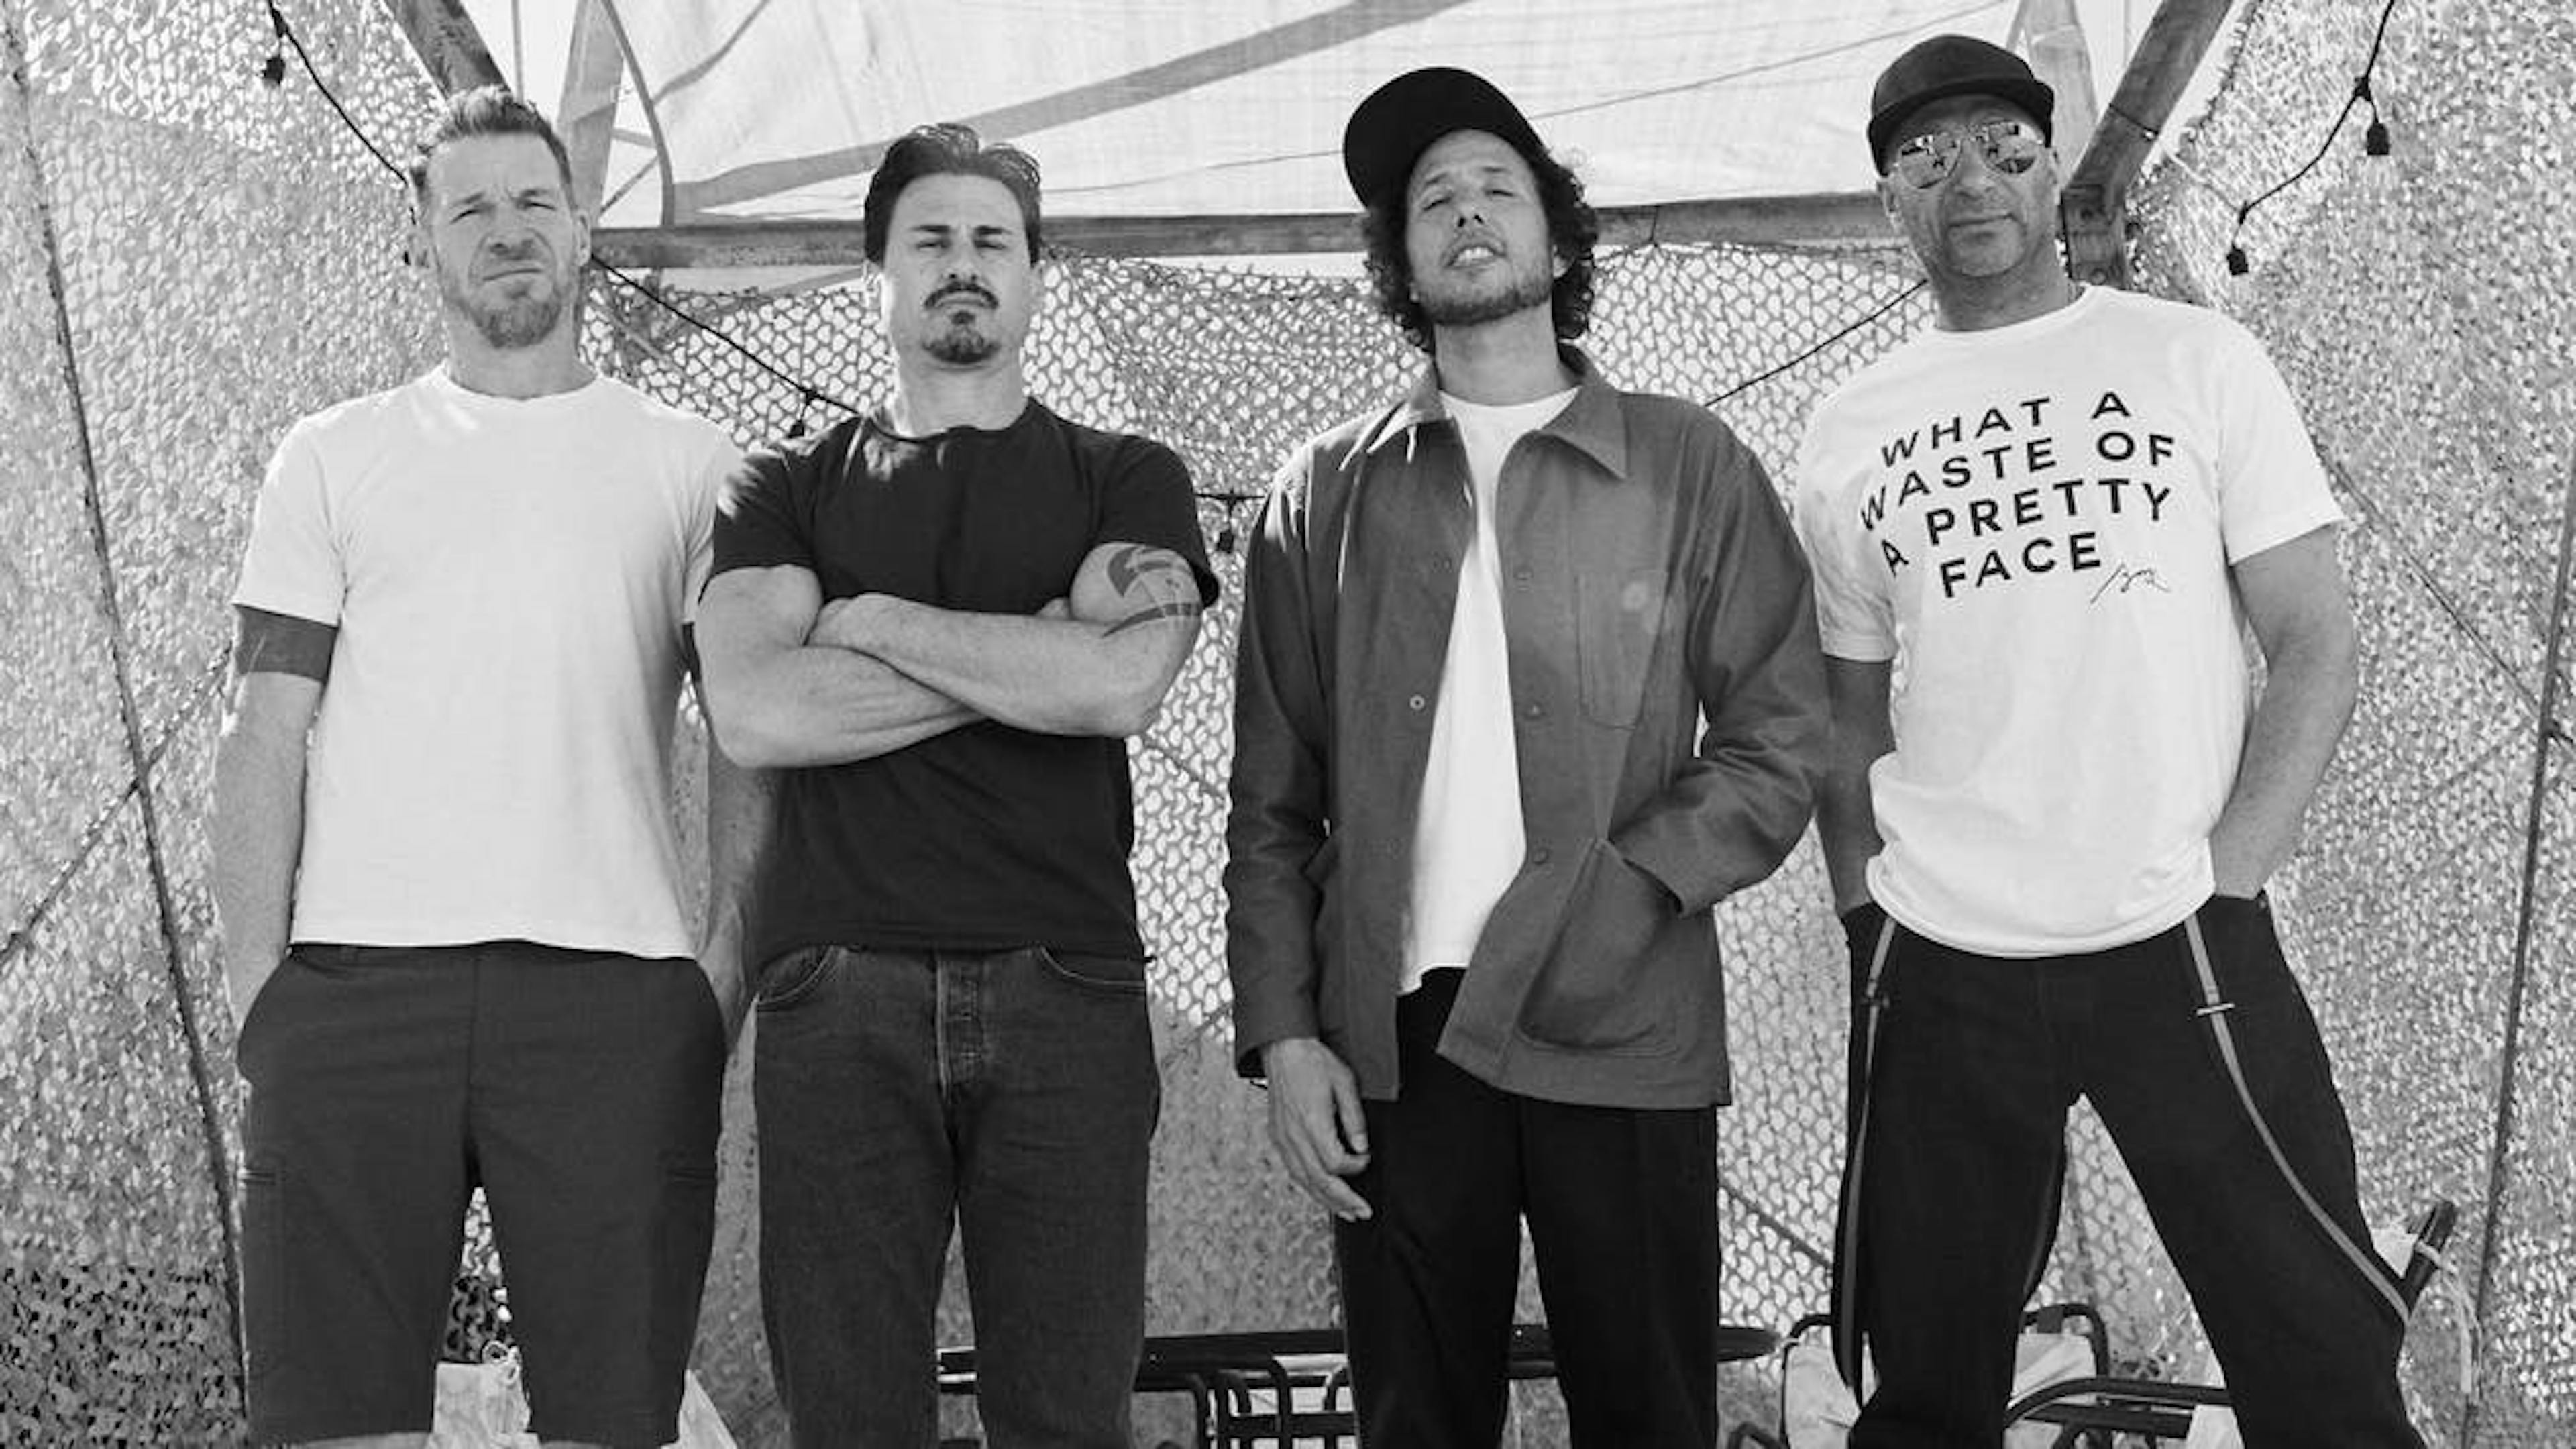 The 20 greatest Rage Against The Machine songs – ranked